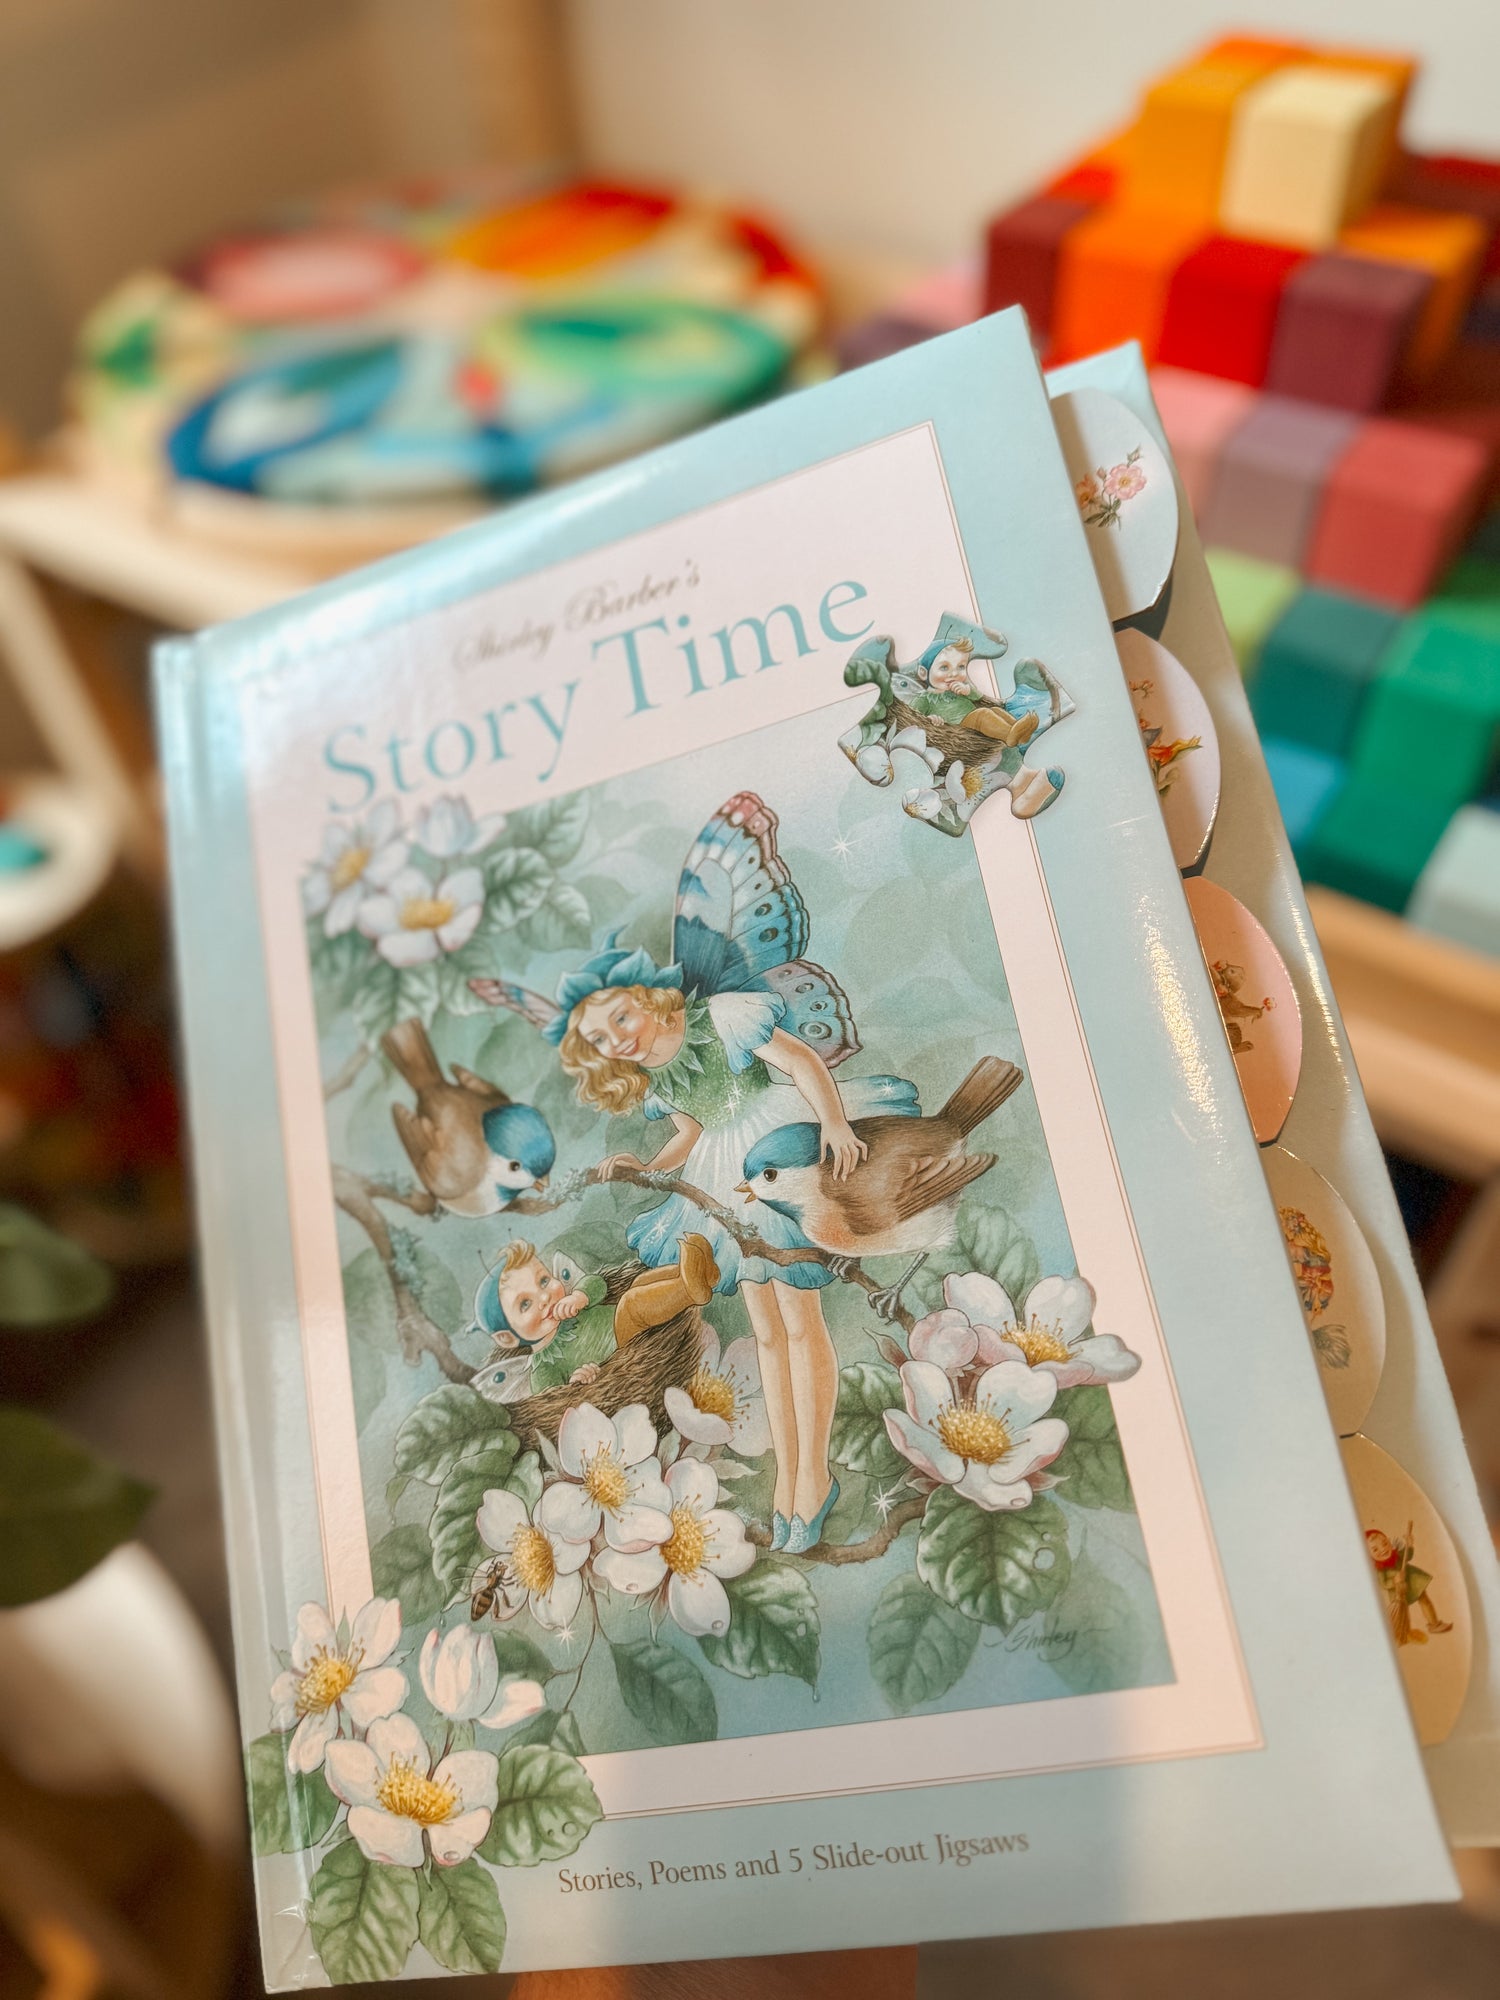 SHIRLEY BARBER | SHIRLEY BARBER'S STORY TIME (SLIDE OUT PUZZLE BOARD BOOK) by SHIRLEY BARBER - The Playful Collective